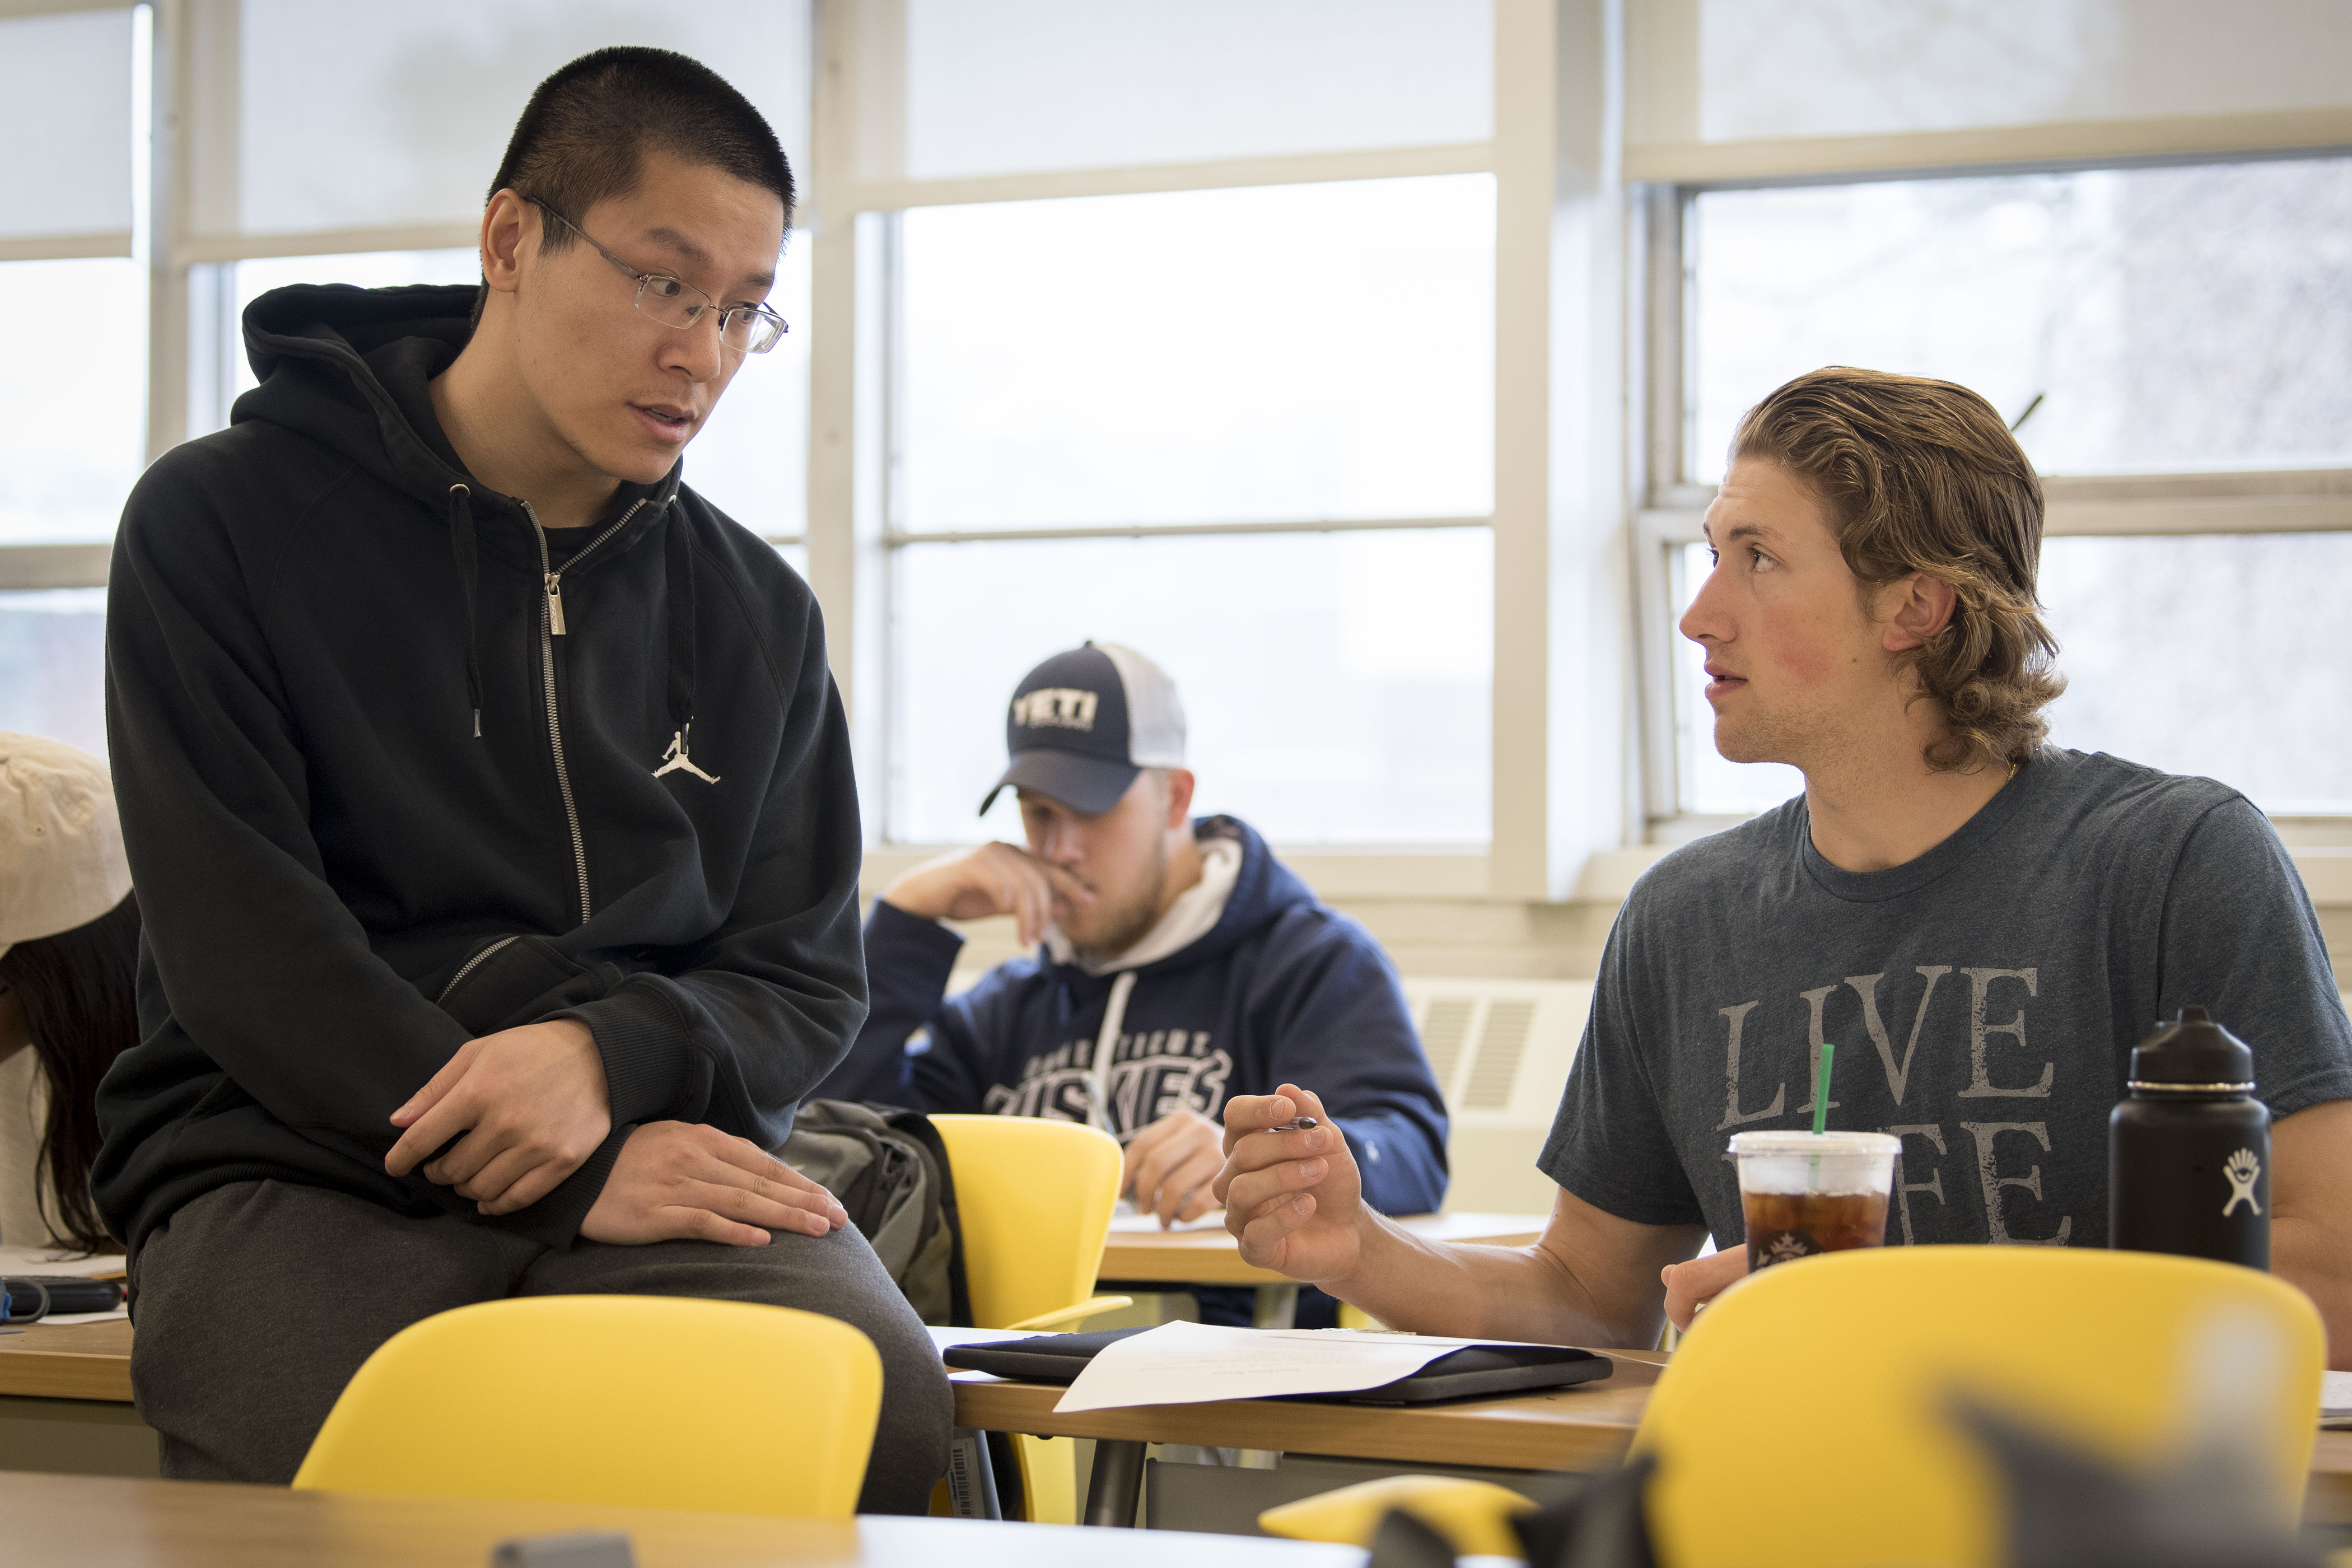 Baseball player Chris Winkel ‘20 (BUS), right, talks with teaching assistant Jungang Li during a Calculus for Business and Economics class in Monteith. To Winkel, being a Husky is having 'a mindset to embrace every obstacle ahead ... and overcome it.' (Sean Flynn/UConn Photo)